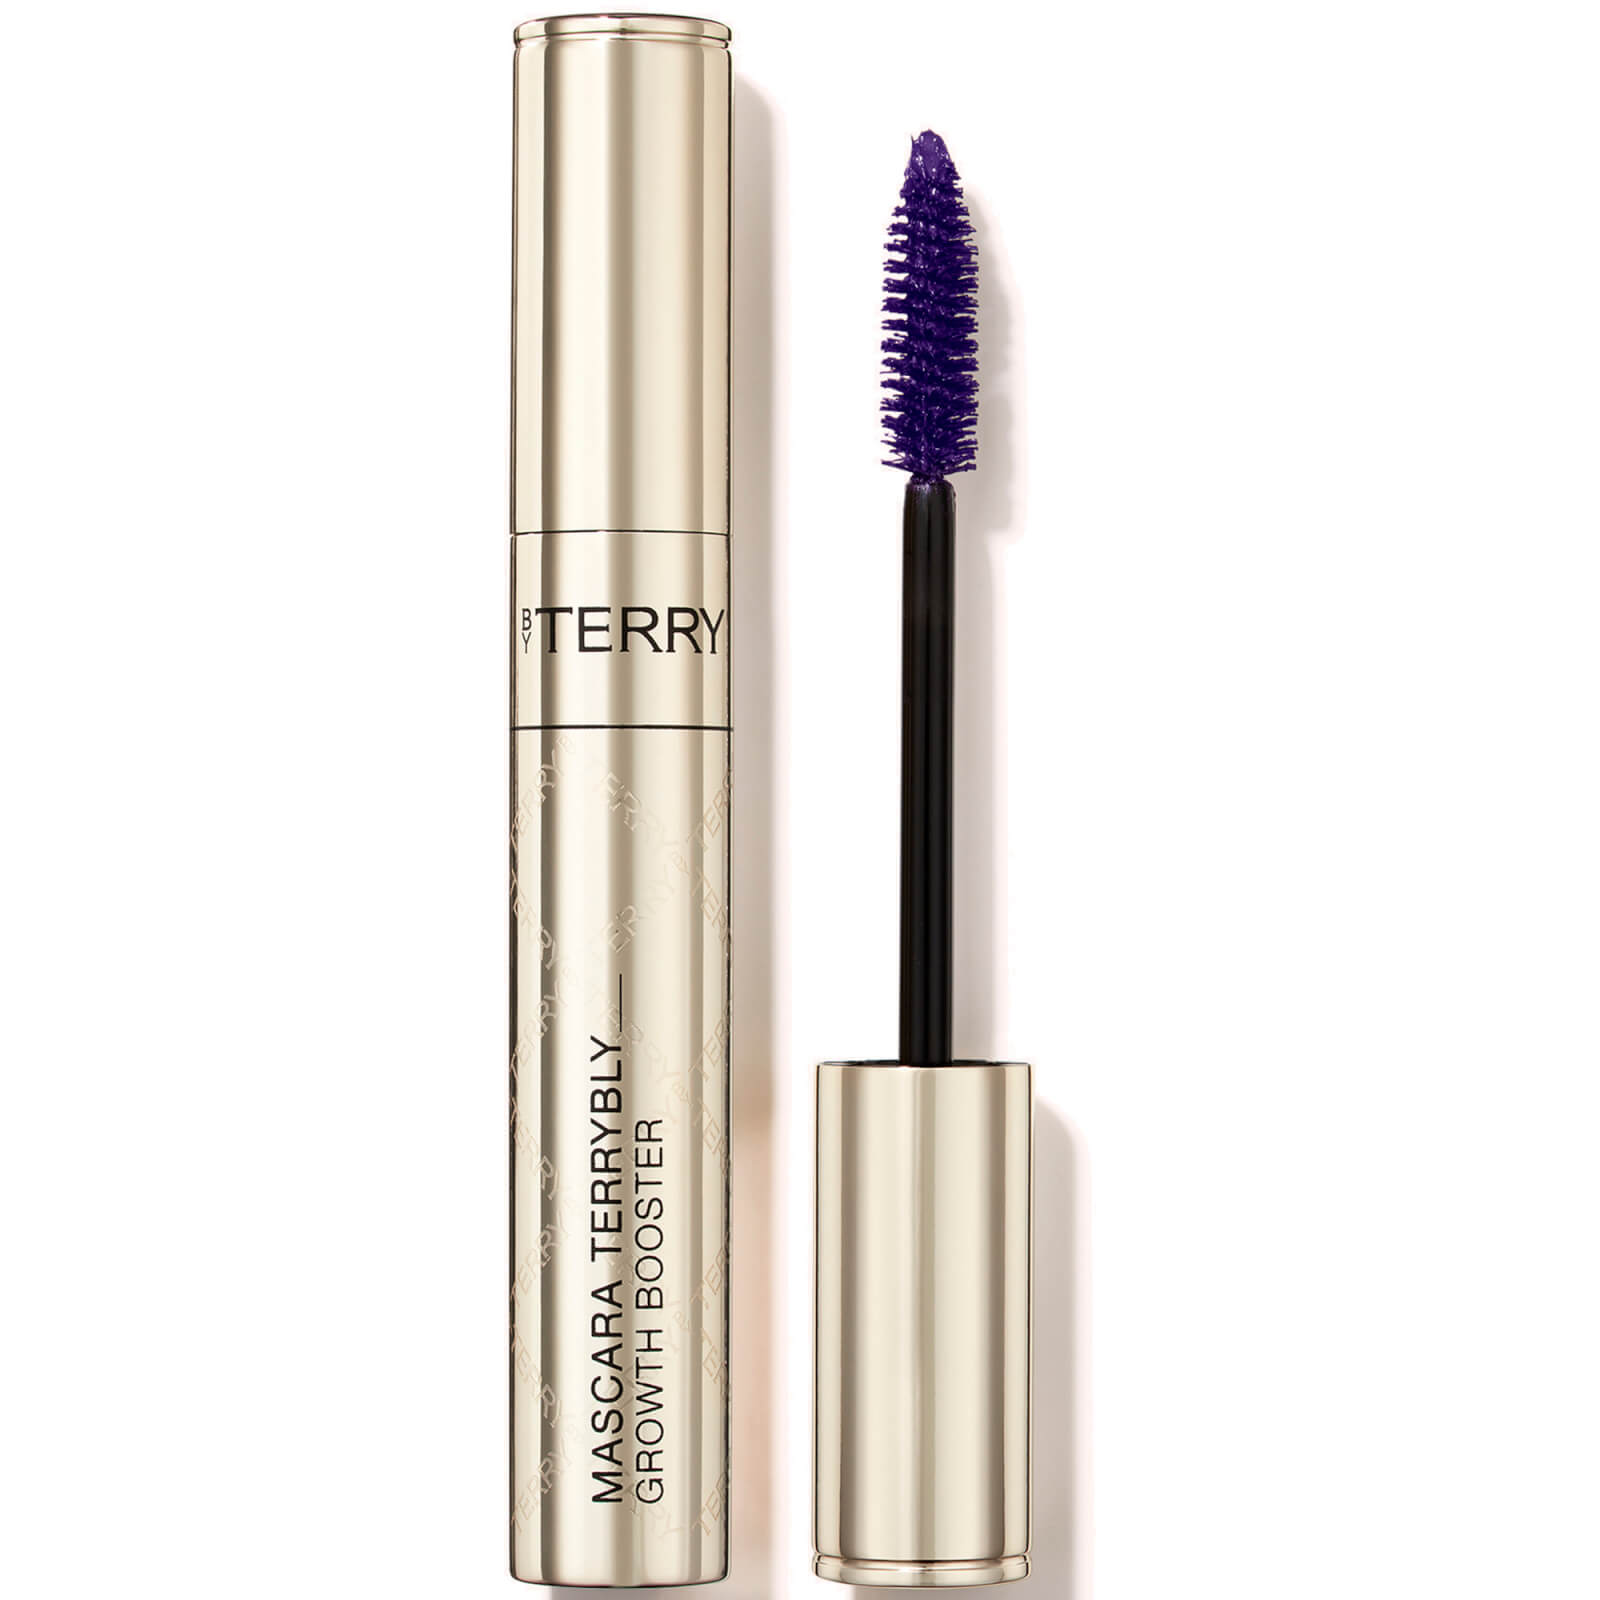 by terry mascara terrybly 8Â ml (diffÃ©rentes teintes disponibles) - 4. purple success